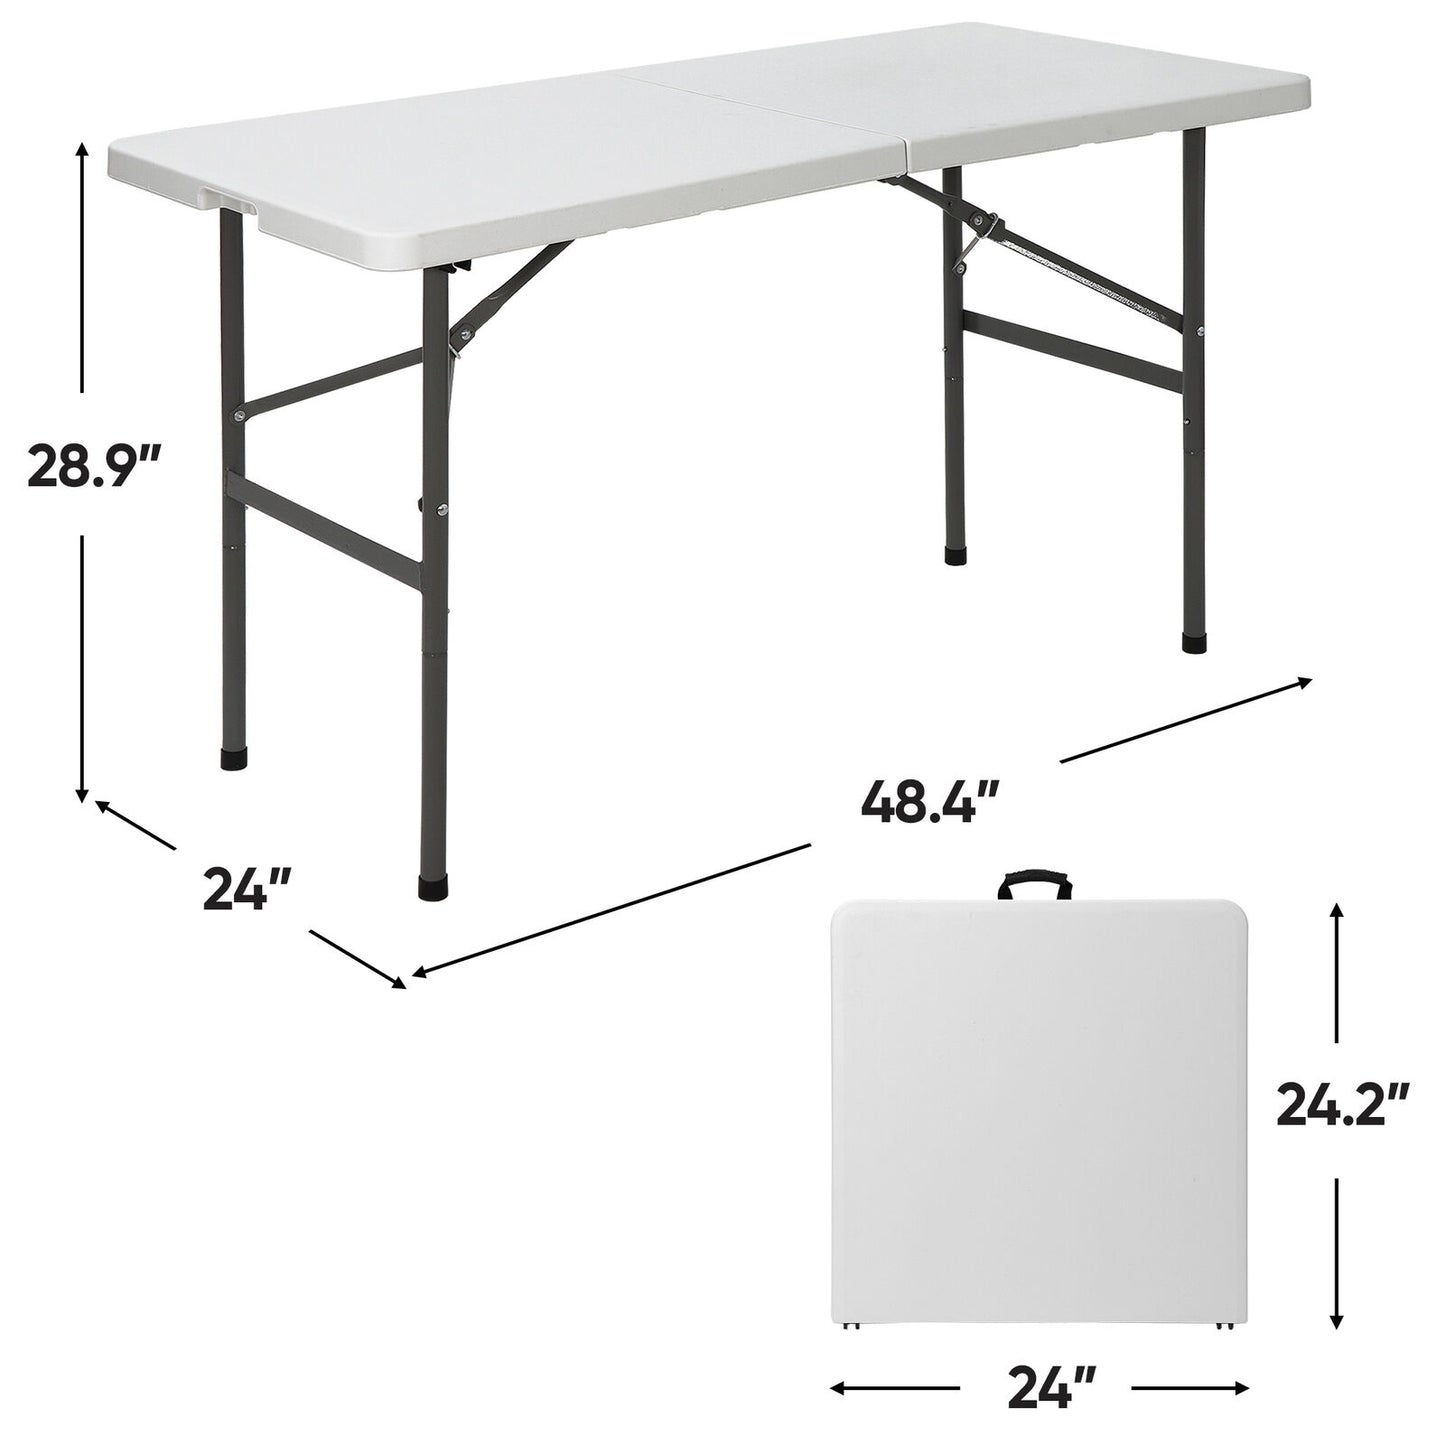 4 FT Foldable Portable Plastic Table In/Outdoor Picnic Desk for Picnic Camping